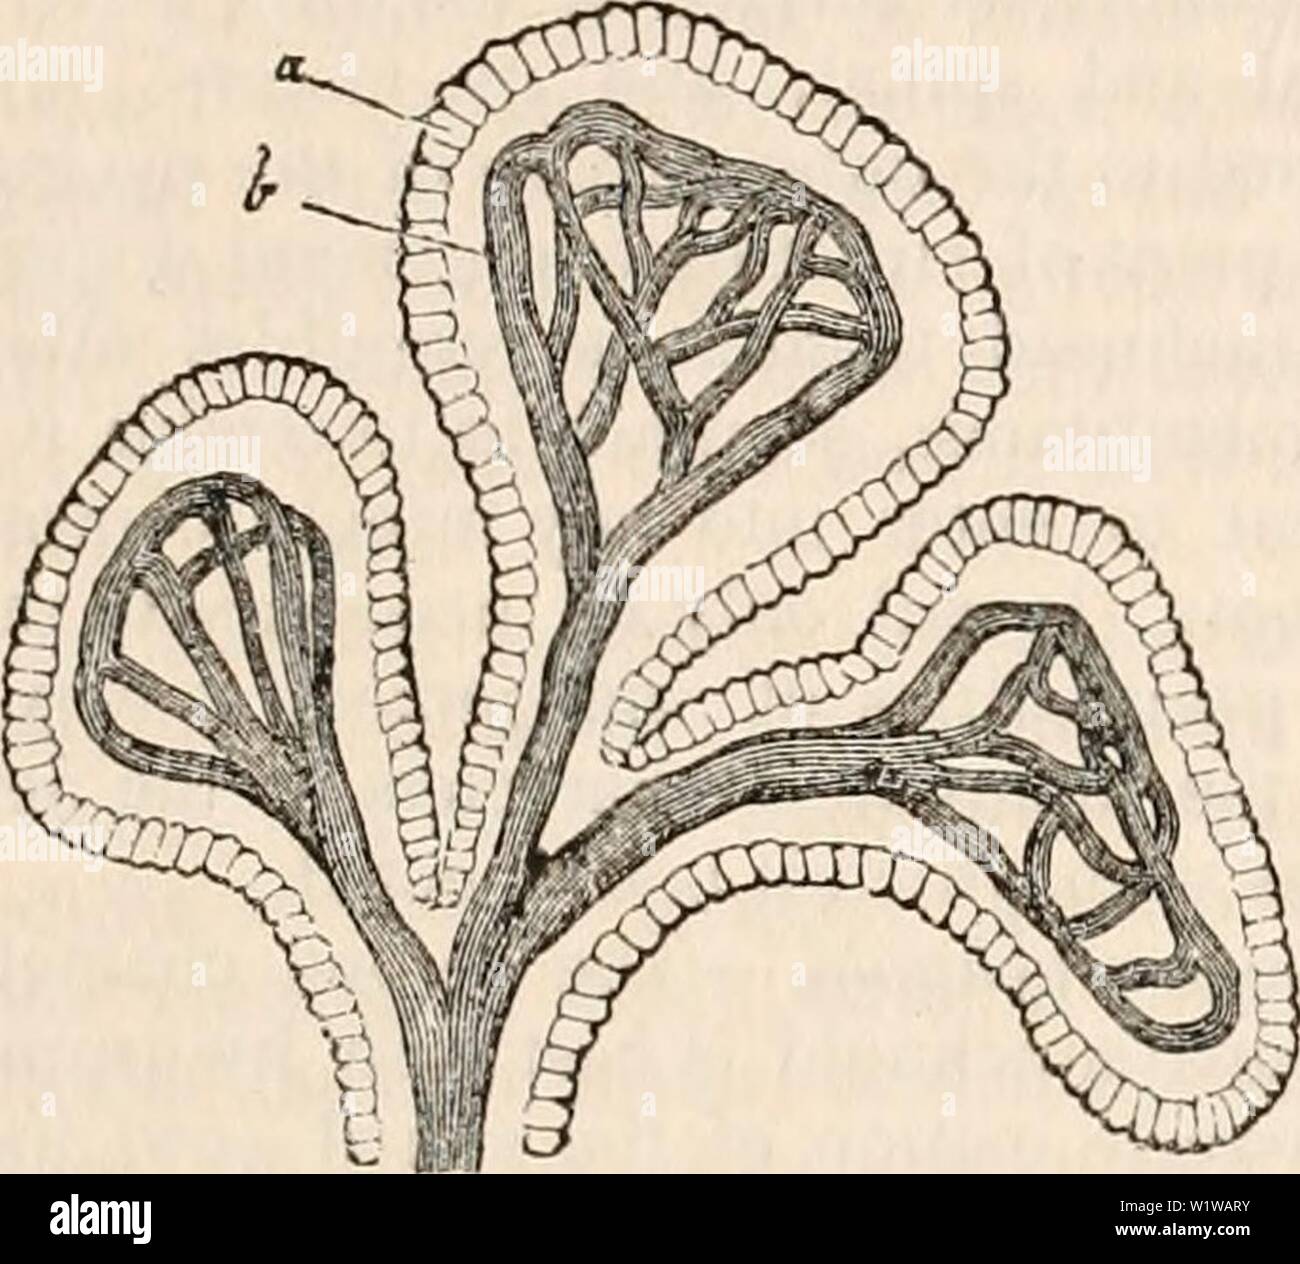 Archive image from page 648 of The cyclopædia of anatomy and. The cyclopædia of anatomy and physiology  cyclopdiaofana03todd Year: 1847 NERVOUS CENTRES. (HUMAN ANATOMY. THE MENINCES.) 635 The surface of each choroid plexus presents many slight projections or folds resembling villi, in which are contained loops and plexi- form anastomoses of minute vessels, very si- milar to the arrangement of the vessels of the villous processes of the chorion of the ovum, or those of the tufts of the placenta. These vessels are surrounded by an epithelium which has much the appearance of that of serous membra Stock Photo